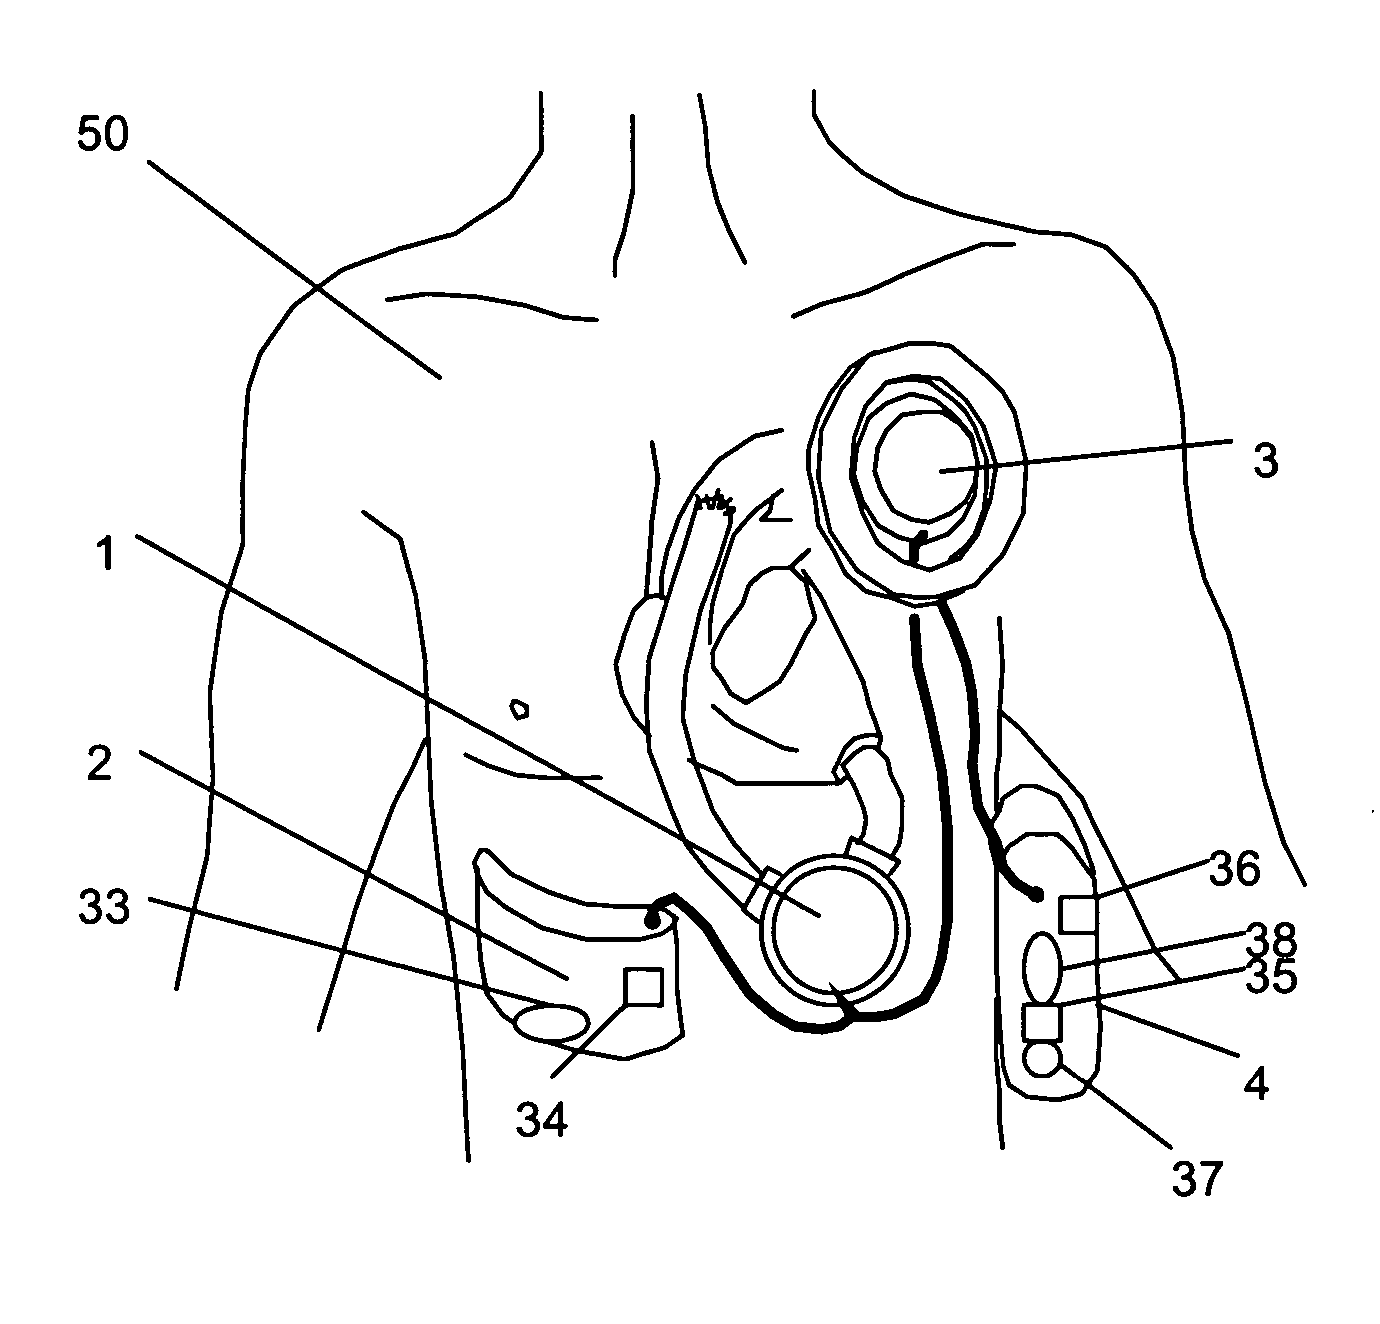 Implantable artificial ventricular assist device